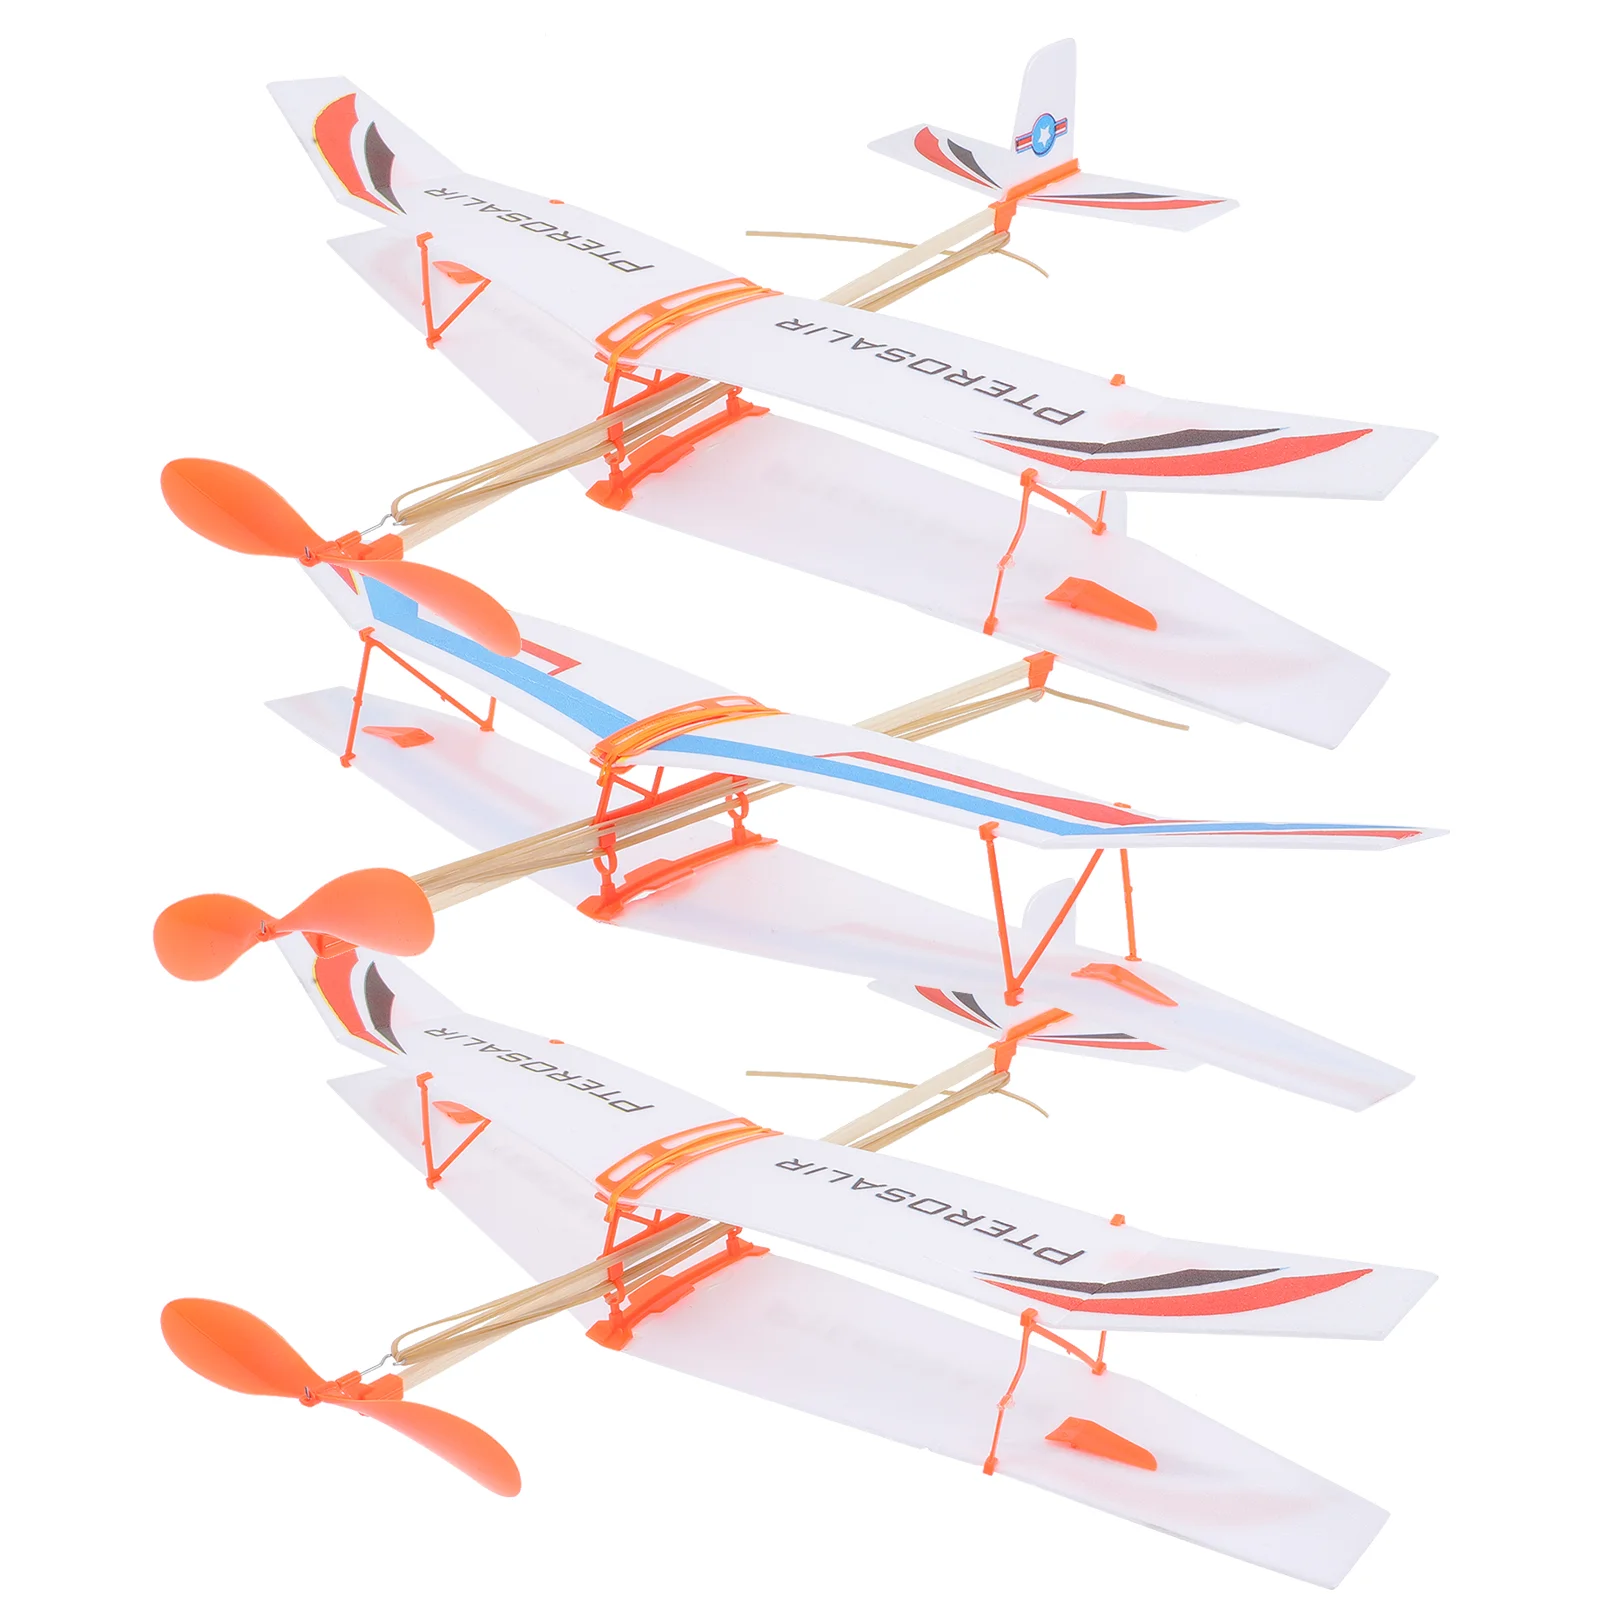 

3 Pcs Rubber Band Biplane Assemble Aircraft Toys Children Glider Planes Educational Models Kids DIY Airplanes